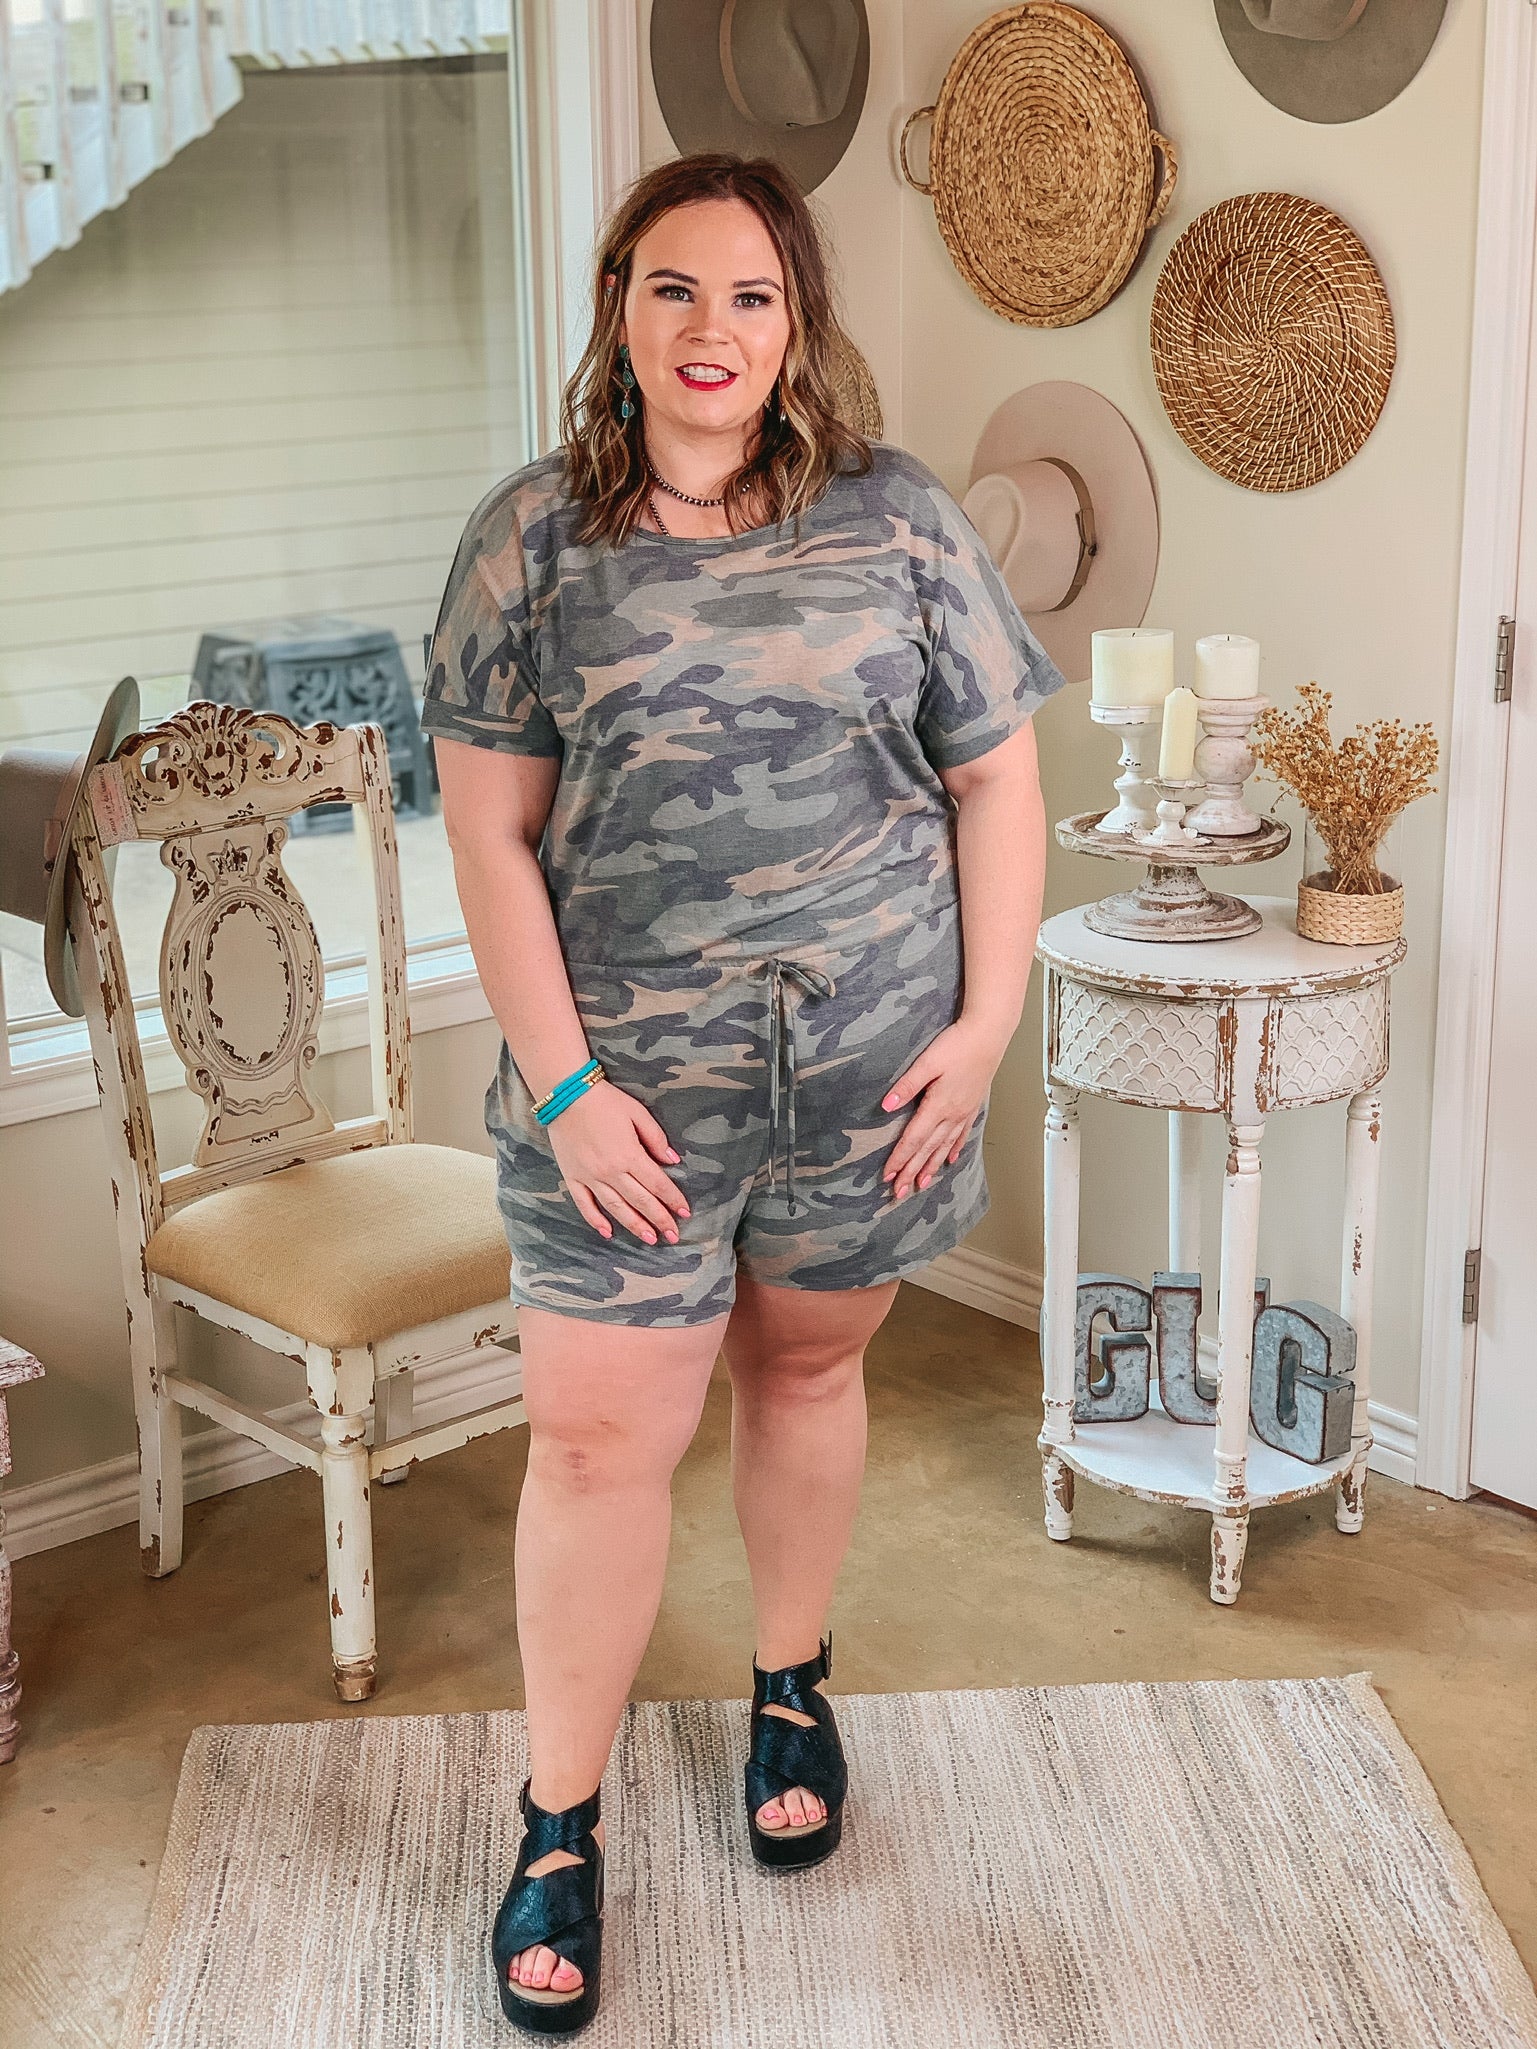 Let Me Loose Short Sleeve Drawstring Waist Tee Shirt Romper in Camouflage - Giddy Up Glamour Boutique